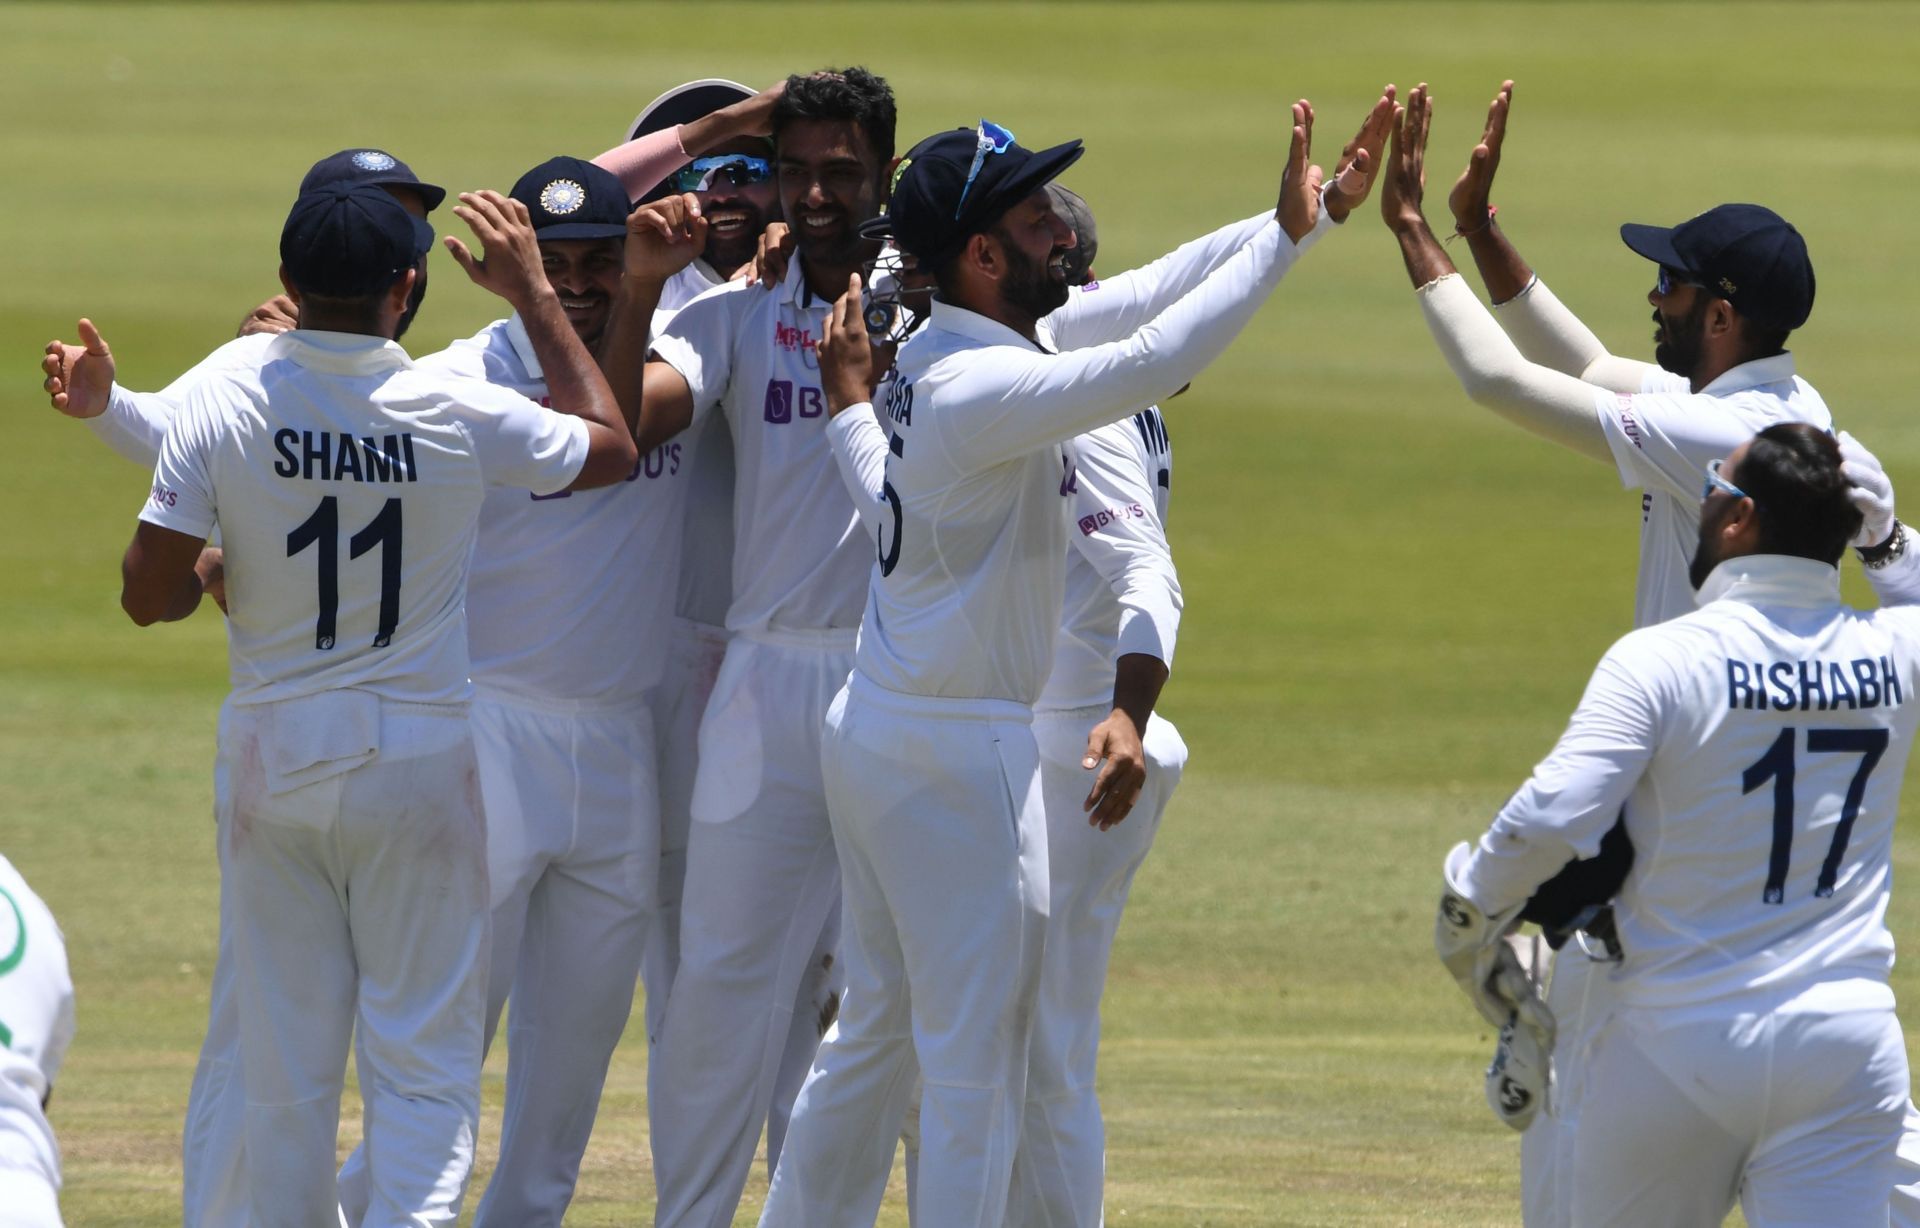 India are one win away from a maiden Test series triumph on South African soil